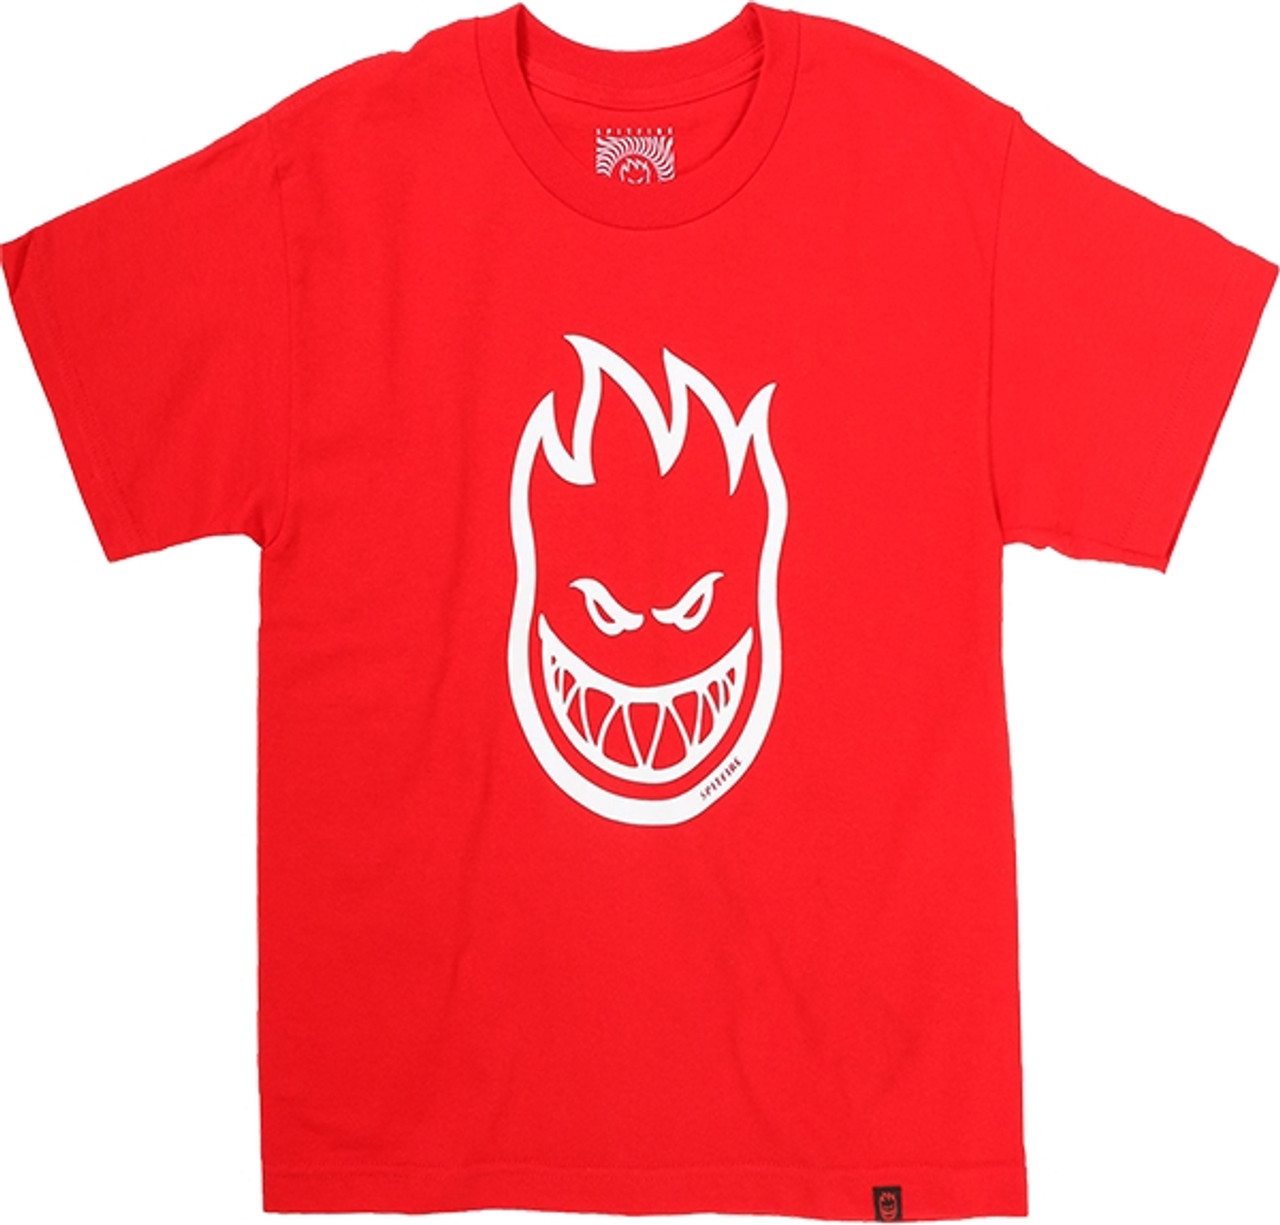 SPITFIRE BIGHEAD YOUTH-SS SMALL RED/WHT